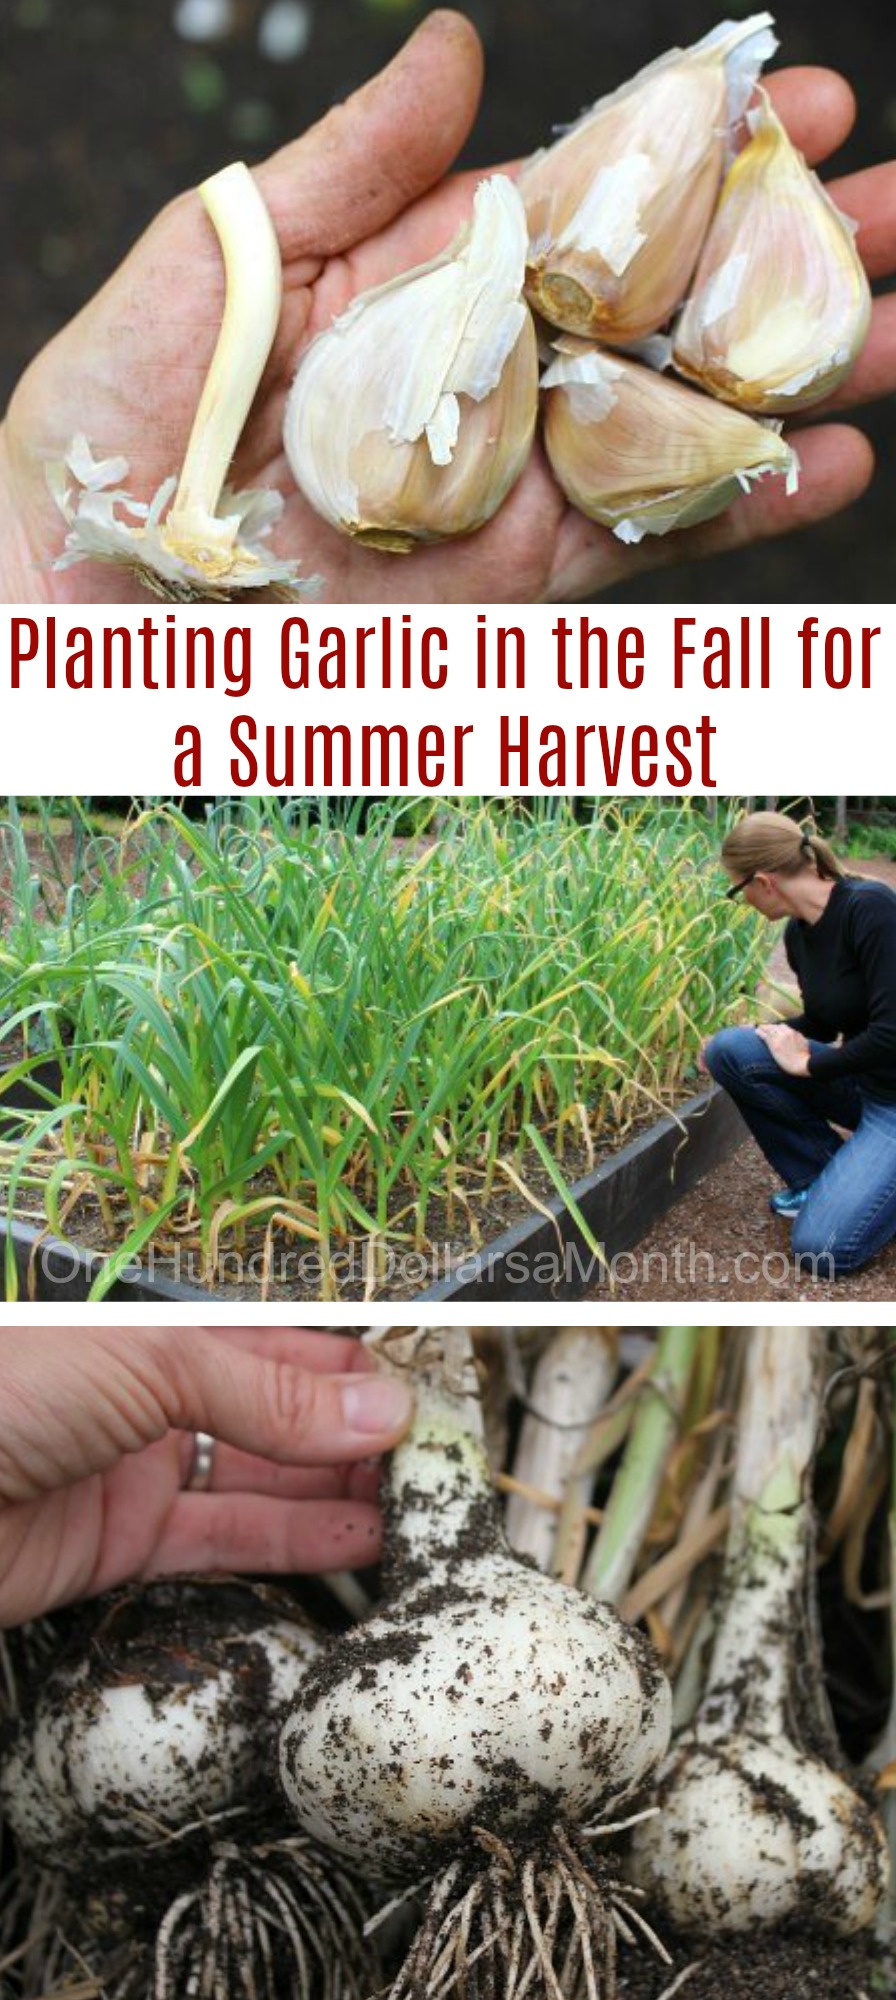 Planting Garlic in the Fall for a Summer Harvest